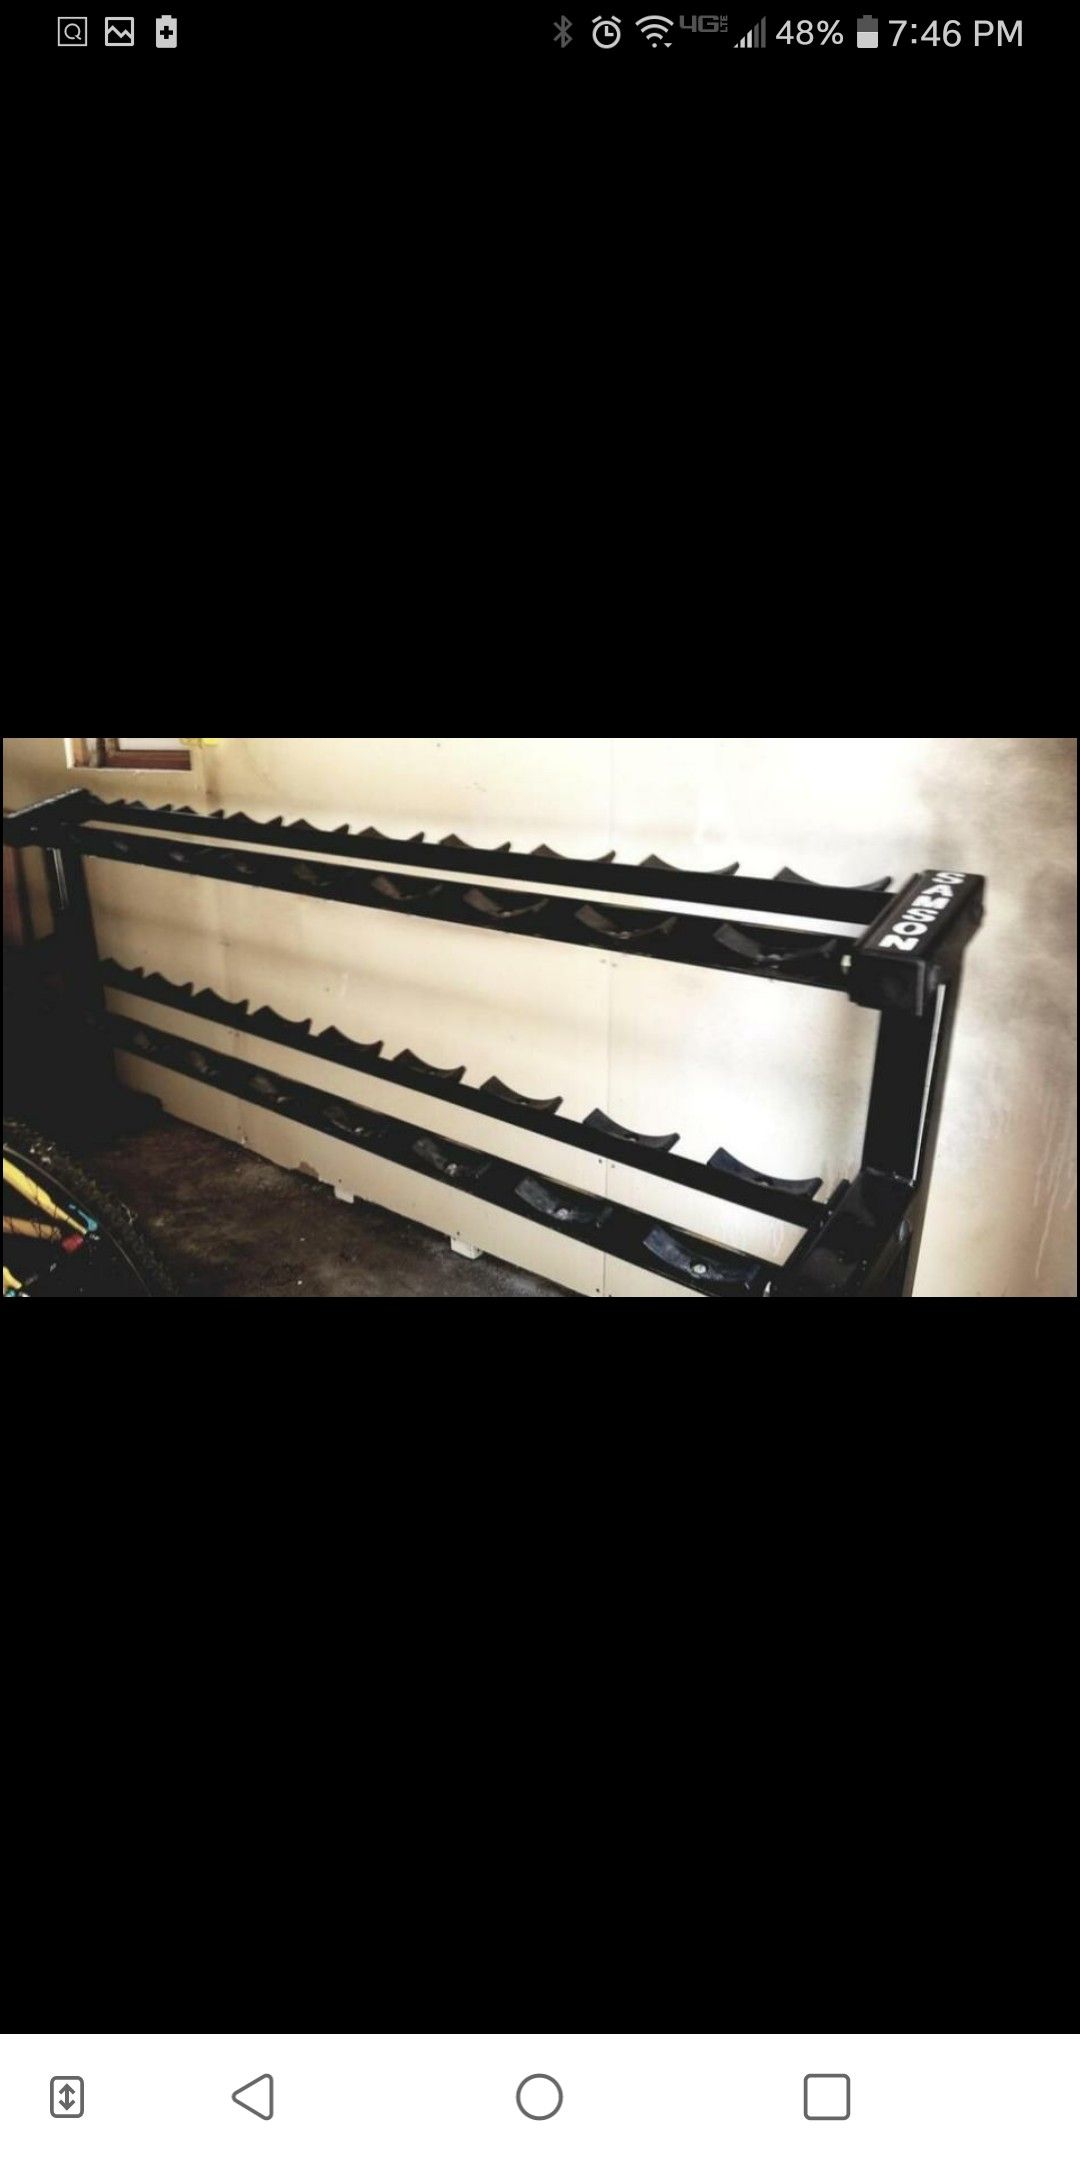 Price cut!!Awesome dumbbell rack!